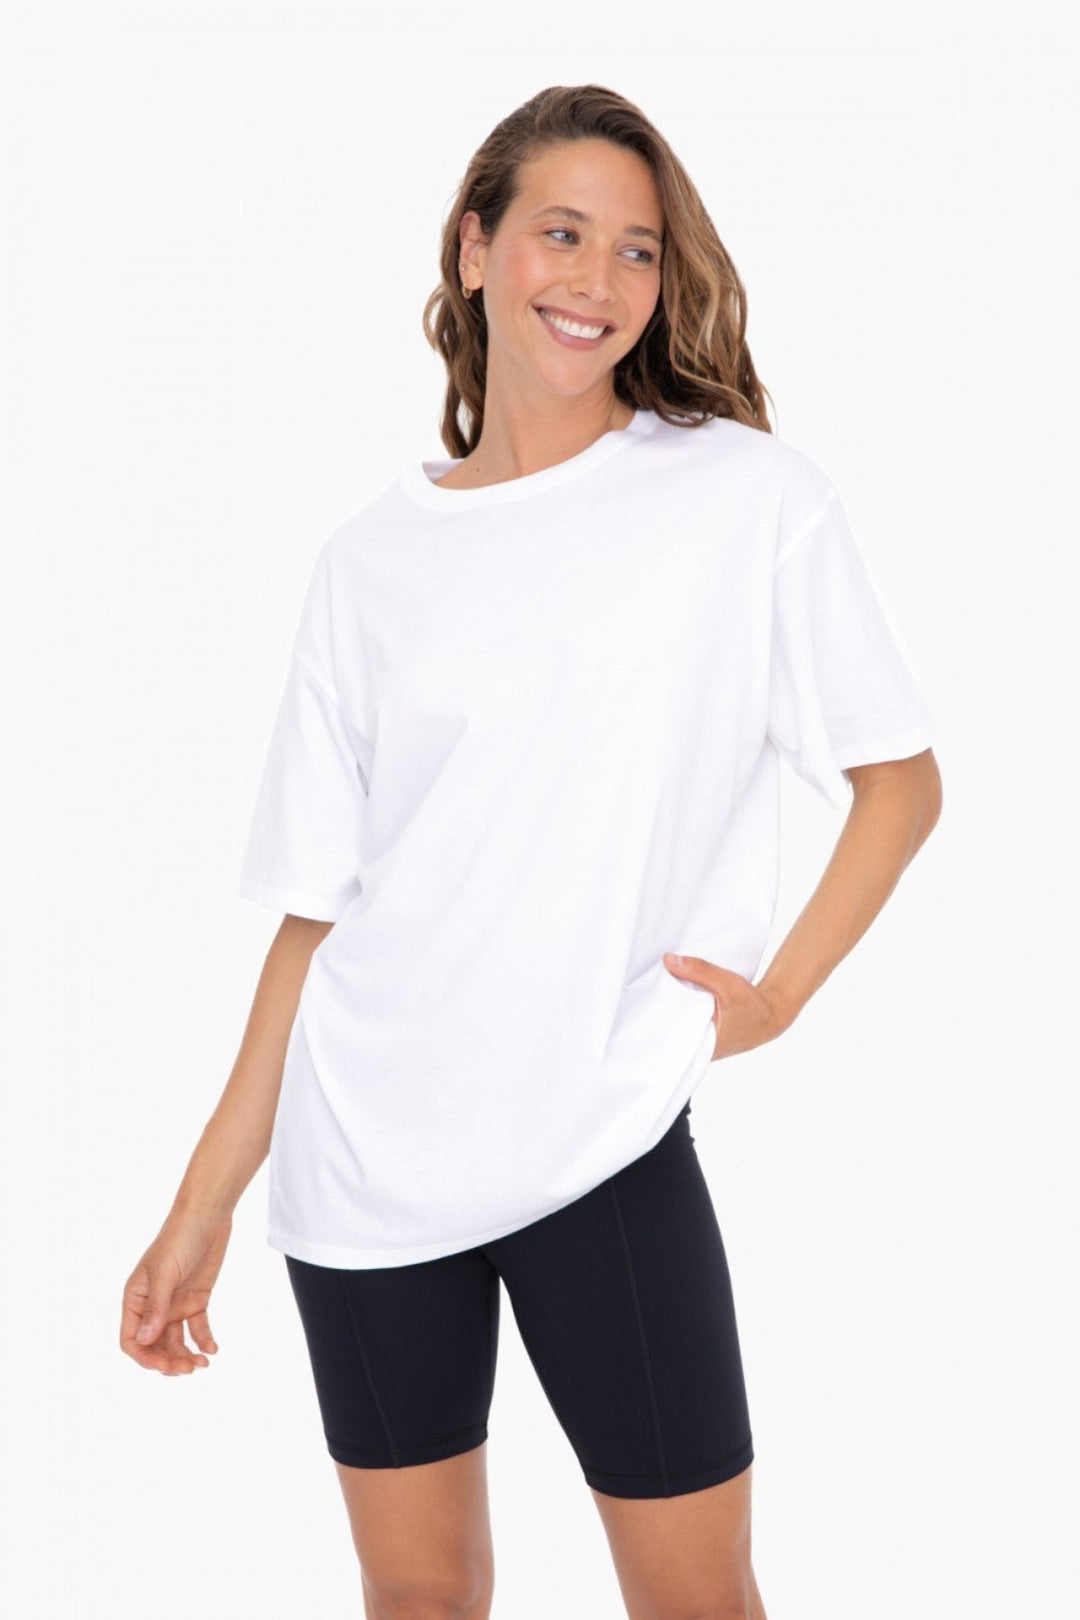 Introducing the newest fabric to our line: 100% organic cotton! This classic short sleeve t-shirt comes in a comfortable boxy oversized boyfriend fit. The fabric has a super soft handfeel and is topped of with a ribbed neckline.